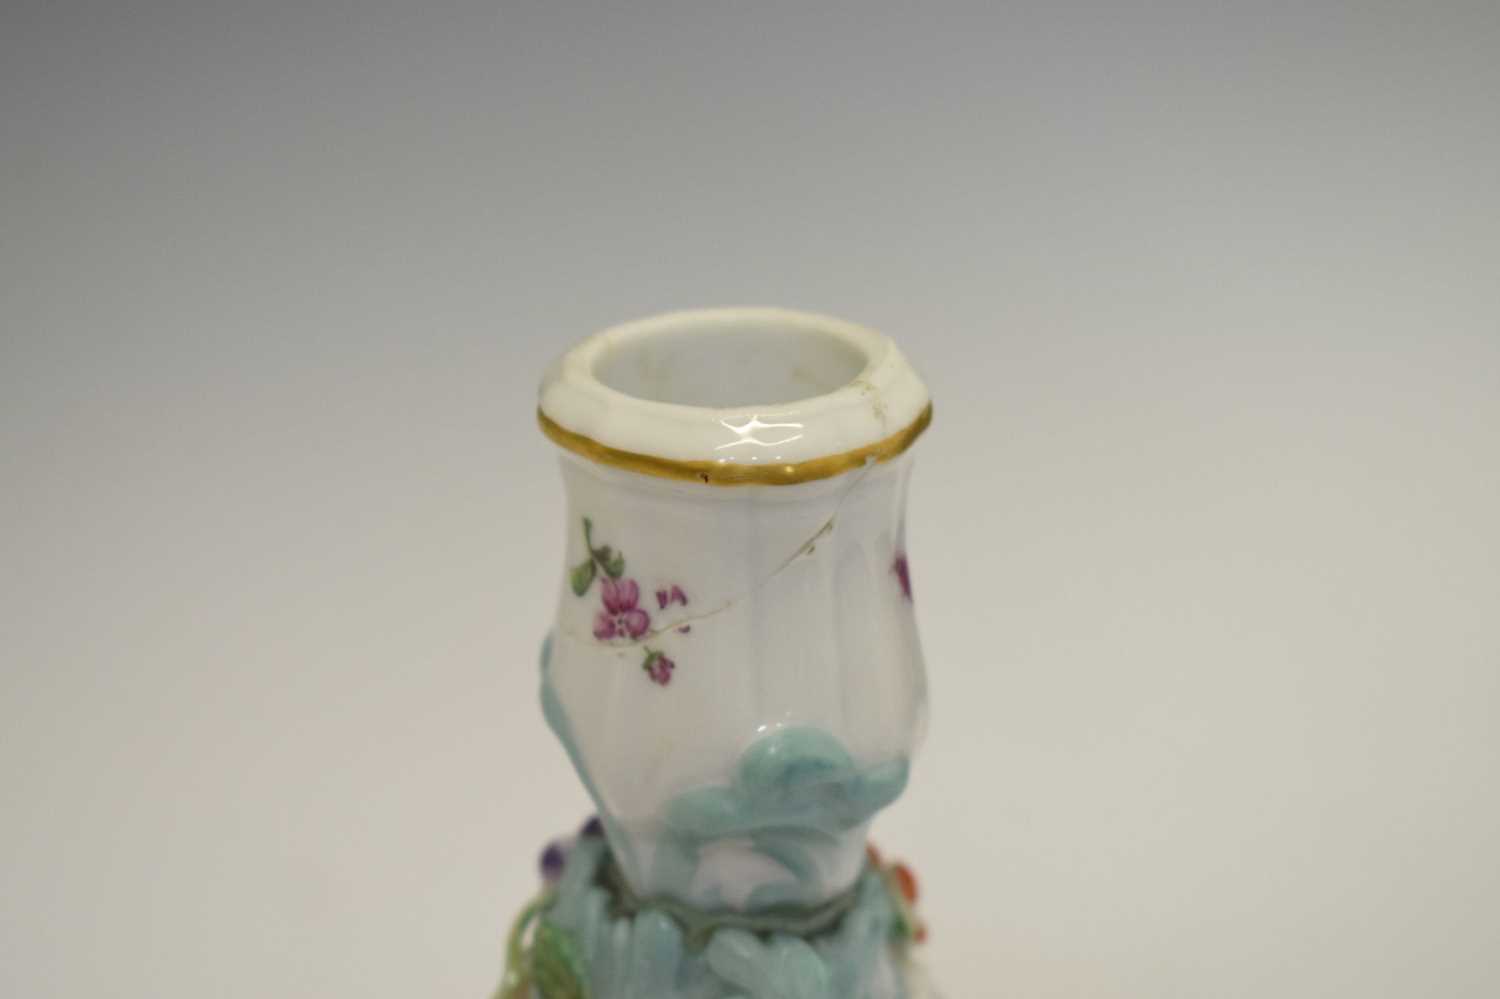 Late 19th/early 20th century Meissen porcelain candlestick - Image 5 of 9